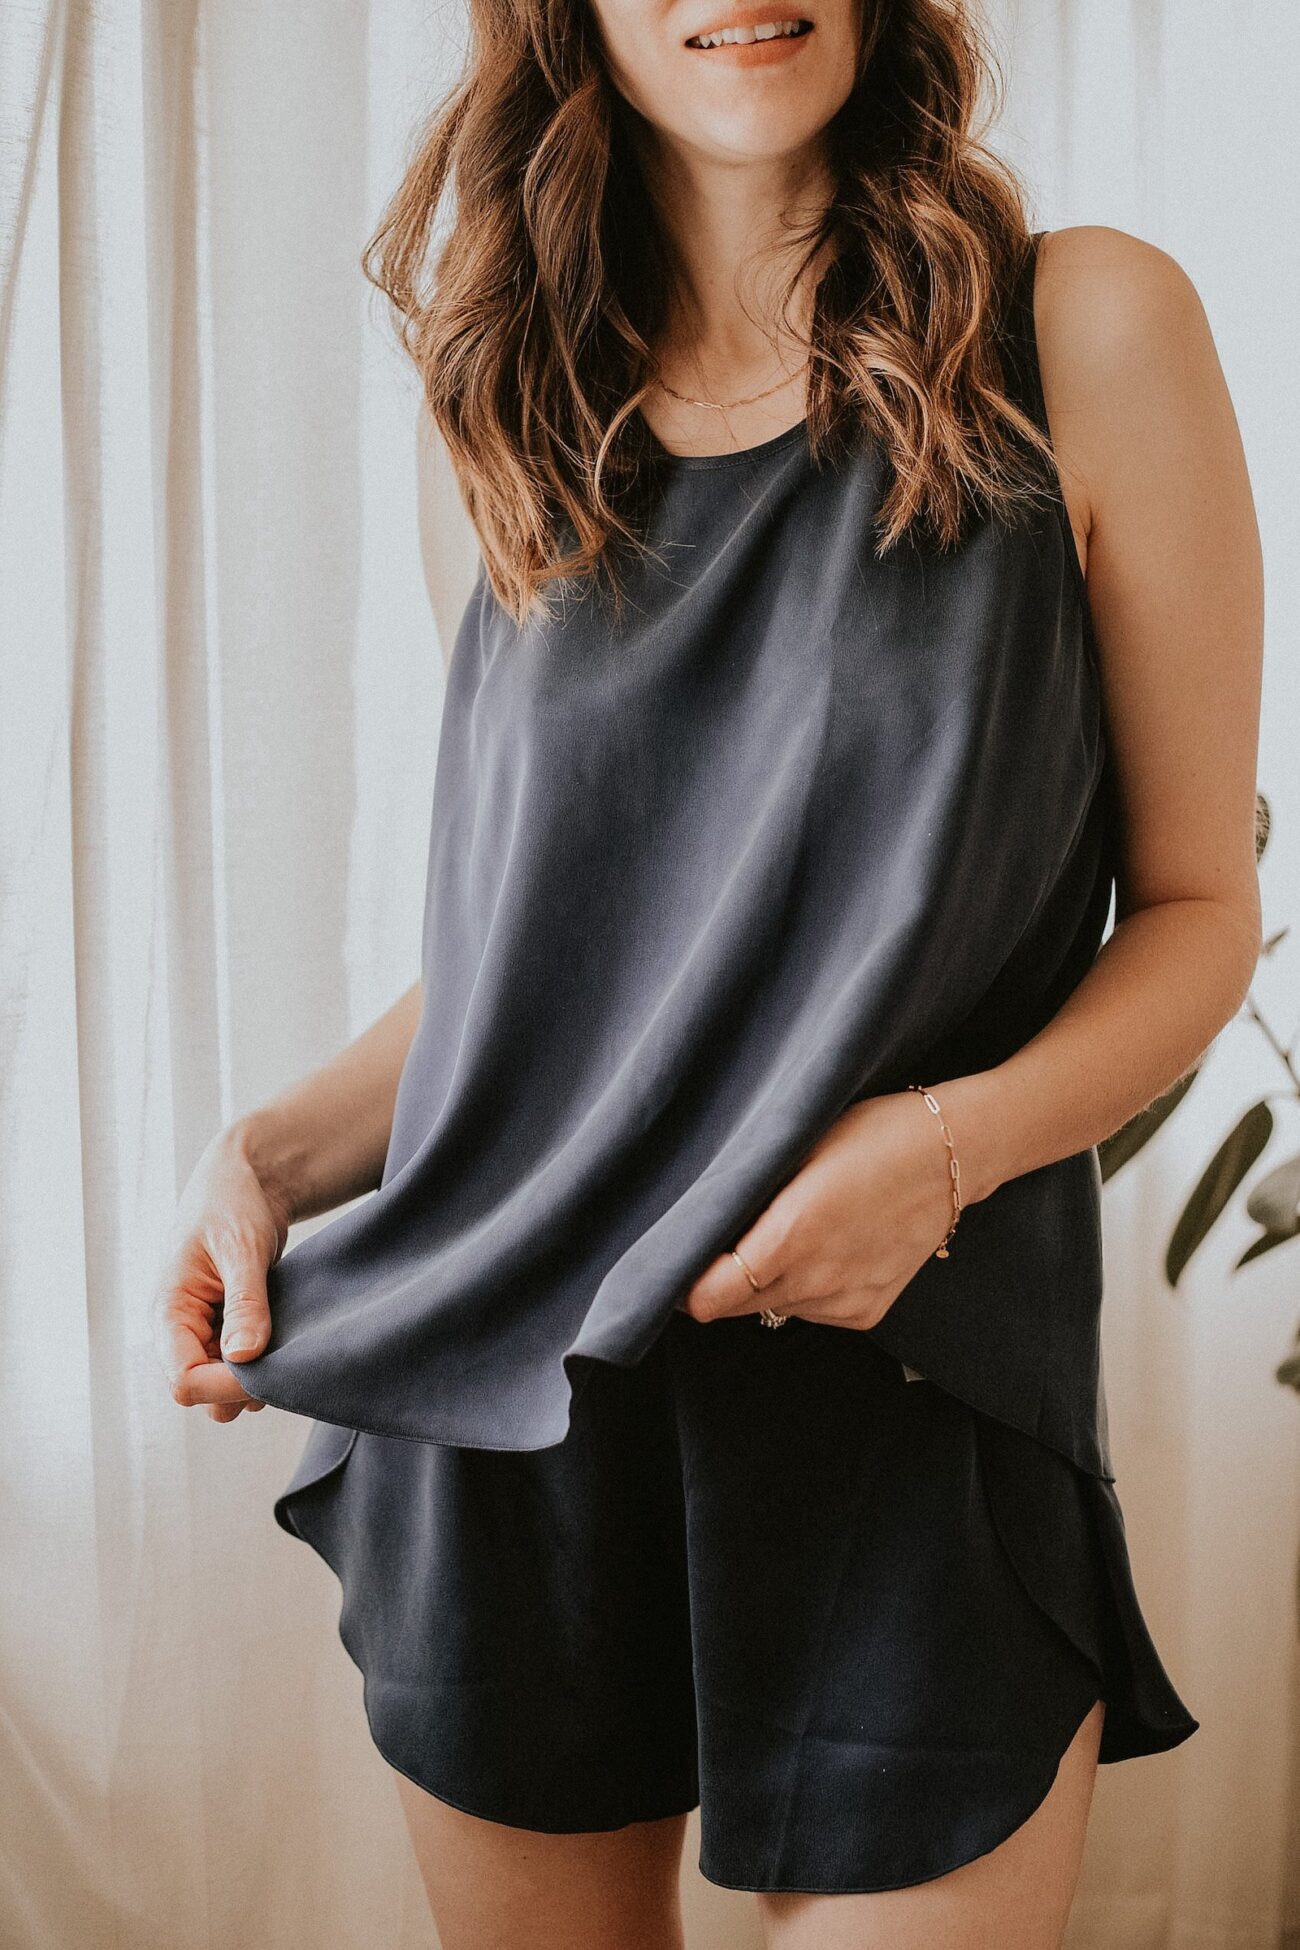 Whatever the option of silk clothing, it's a small luxury no doubt and comes with many benefits. Let's dive into the benefits that silk sleepwear offers.